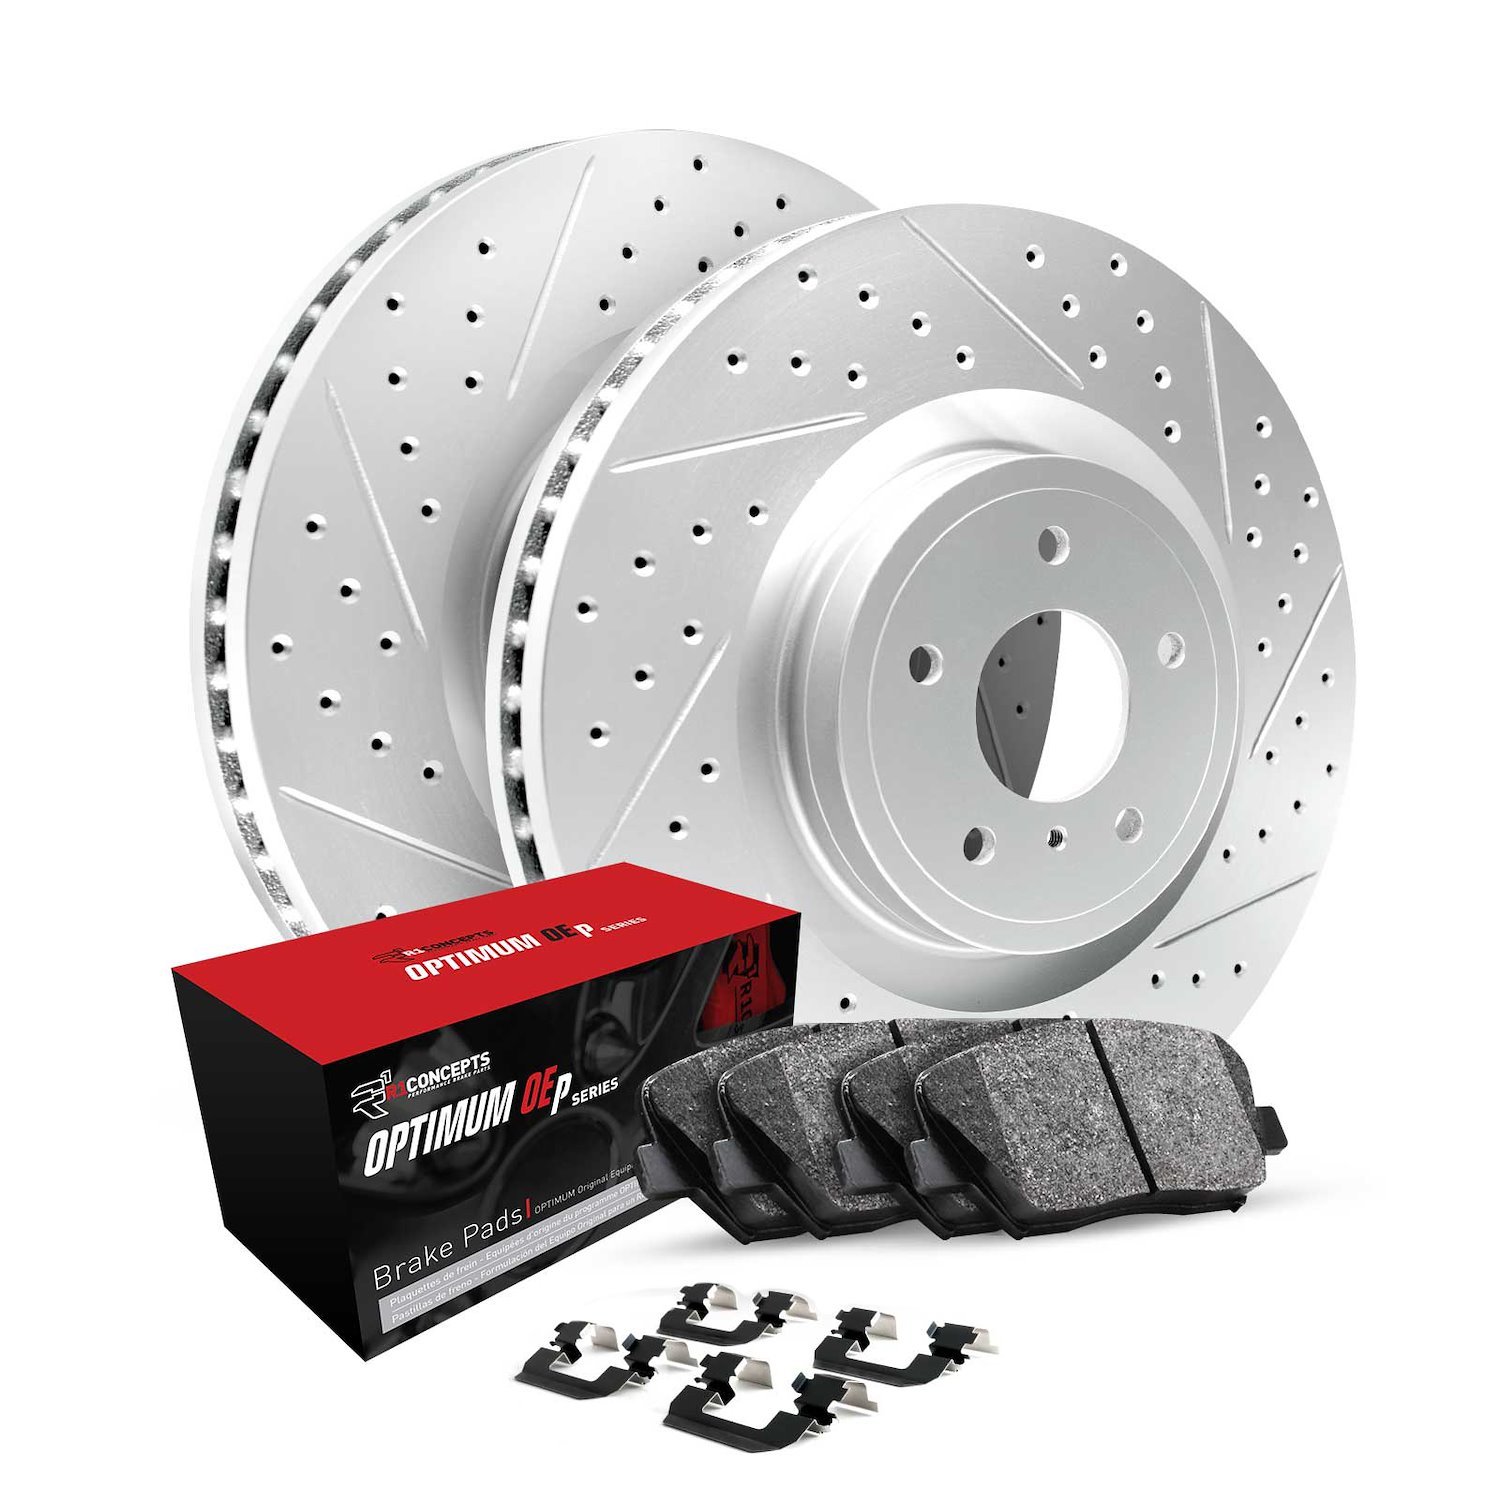 GEO-Carbon Drilled & Slotted Brake Rotor Set w/Optimum OE Pads & Hardware, 2008-2018 Fits Multiple Makes/Models